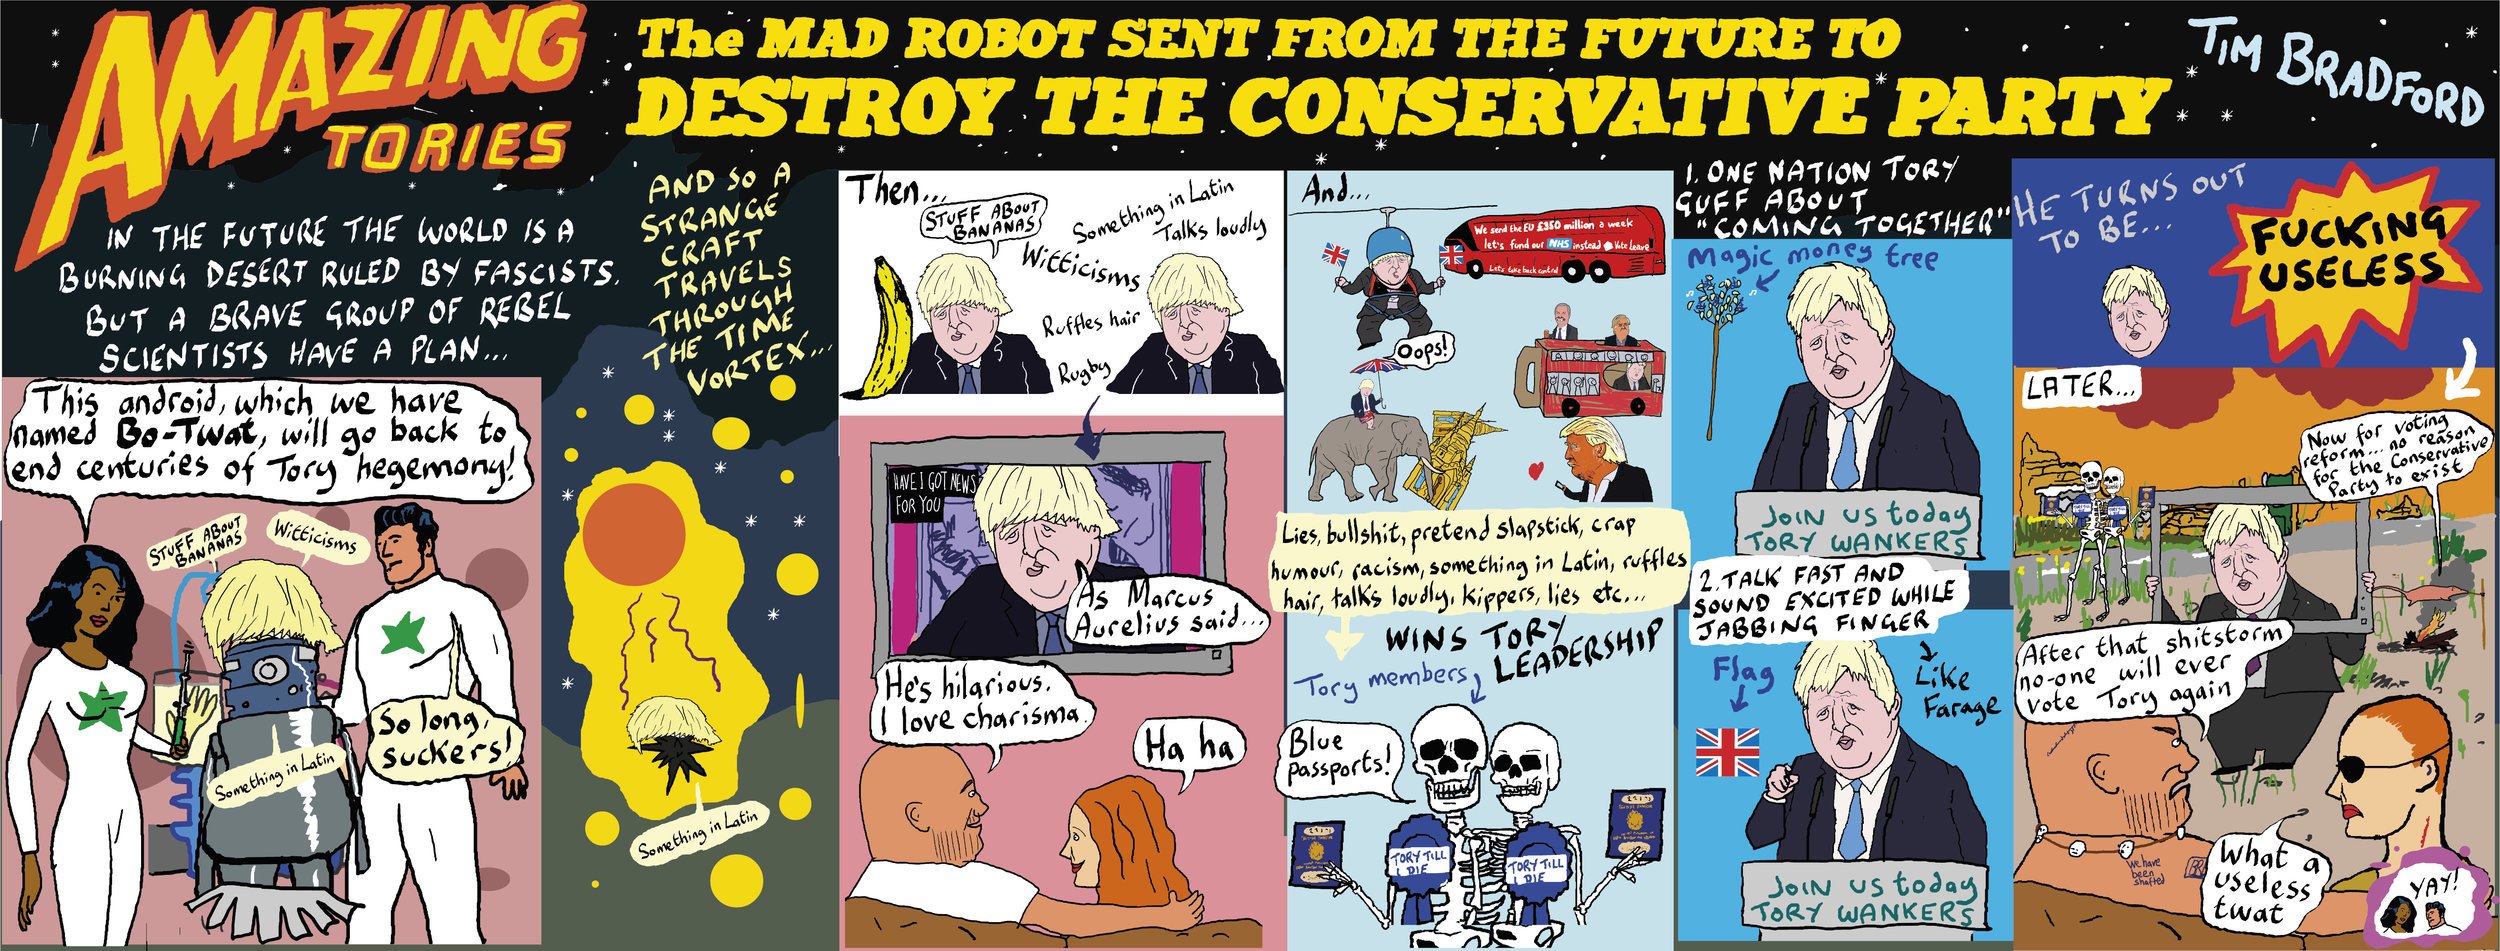 The Mad Robot Sent From The Future To Destroy The Conservative Party - 23/07/19